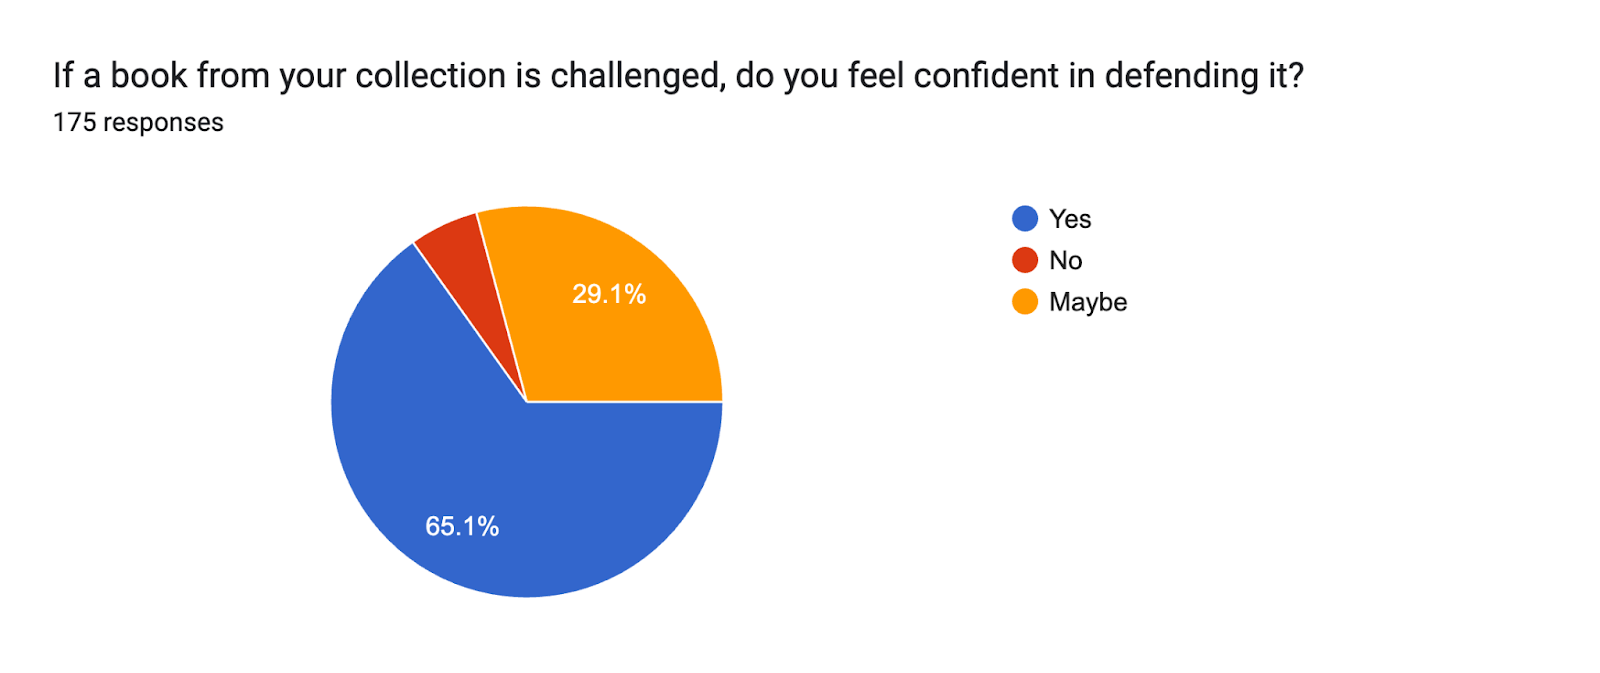 Forms response chart. Question title: If a book from your collection is challenged, do you feel confident in defending it?. Number of responses: 175 responses.